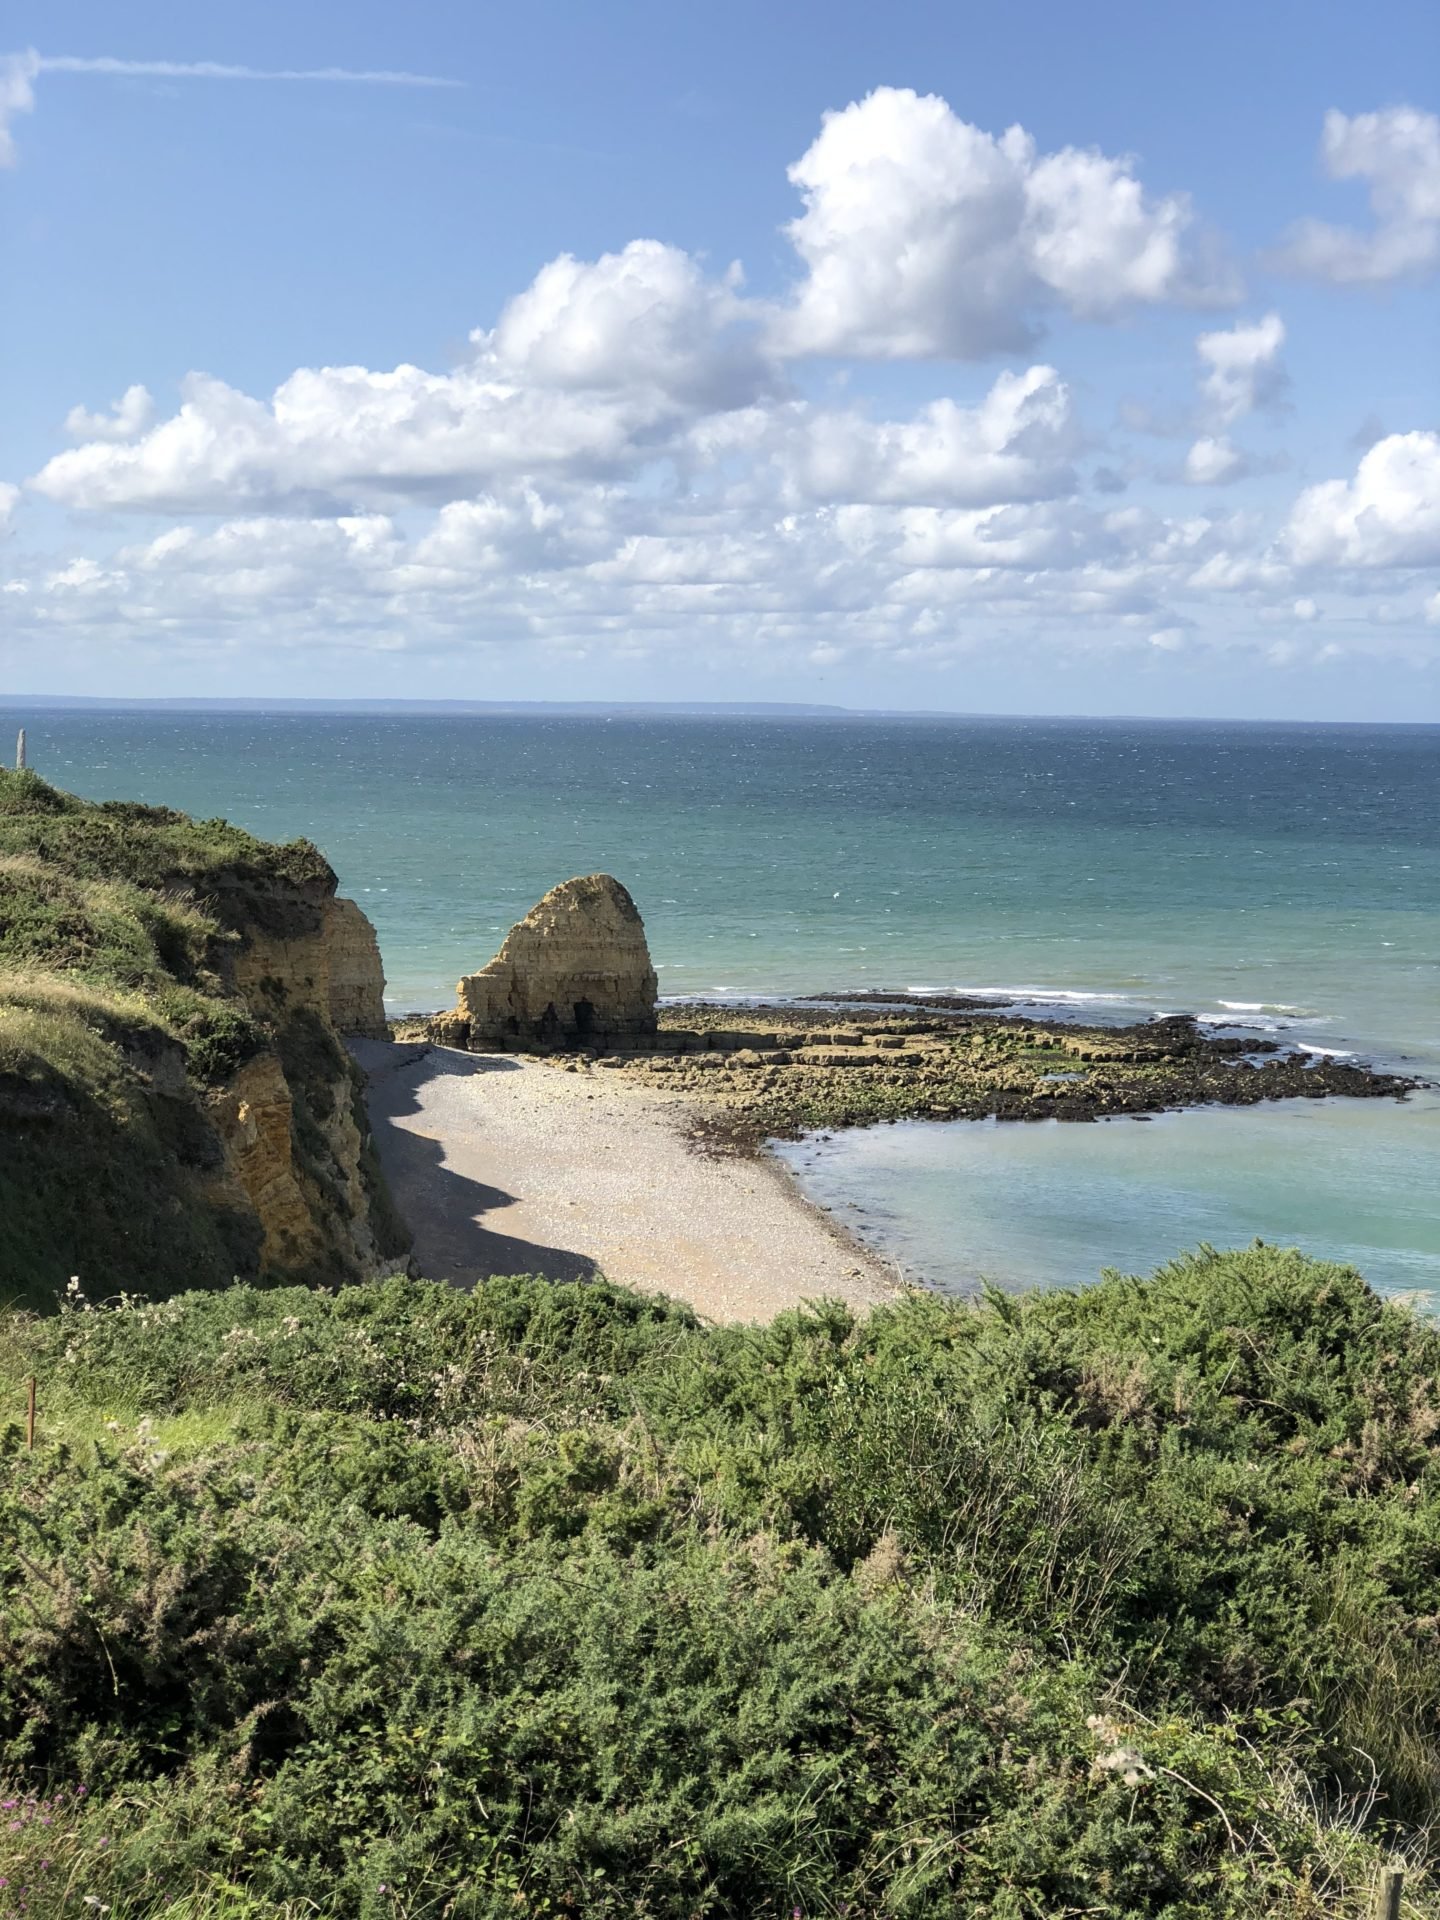 Pointe du Hoc still bears the devastation of the bomb craters. This once beautiful landmark serves as a memorial to to the rangers who climbed the cliff face to secure the battery before D day.